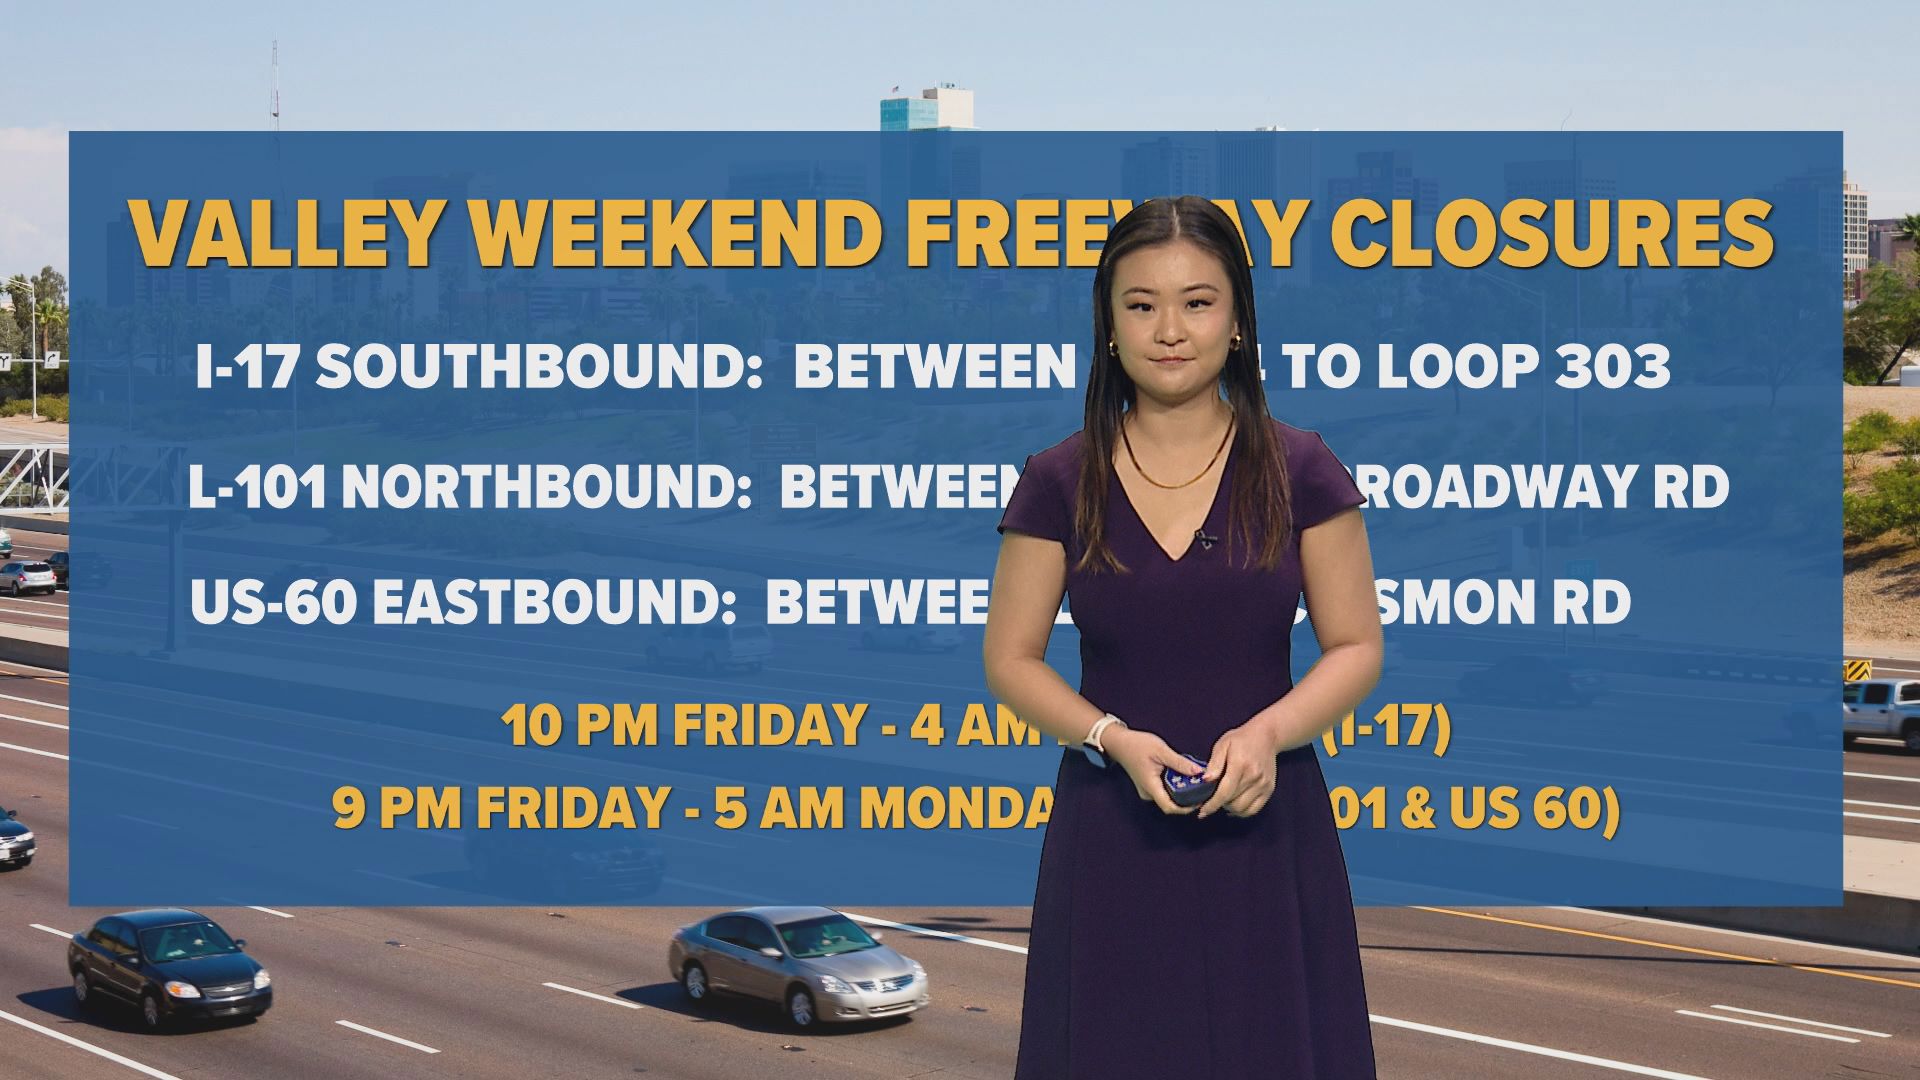 Here are the freeway closures you need to be aware about for Mother's Day weekend.